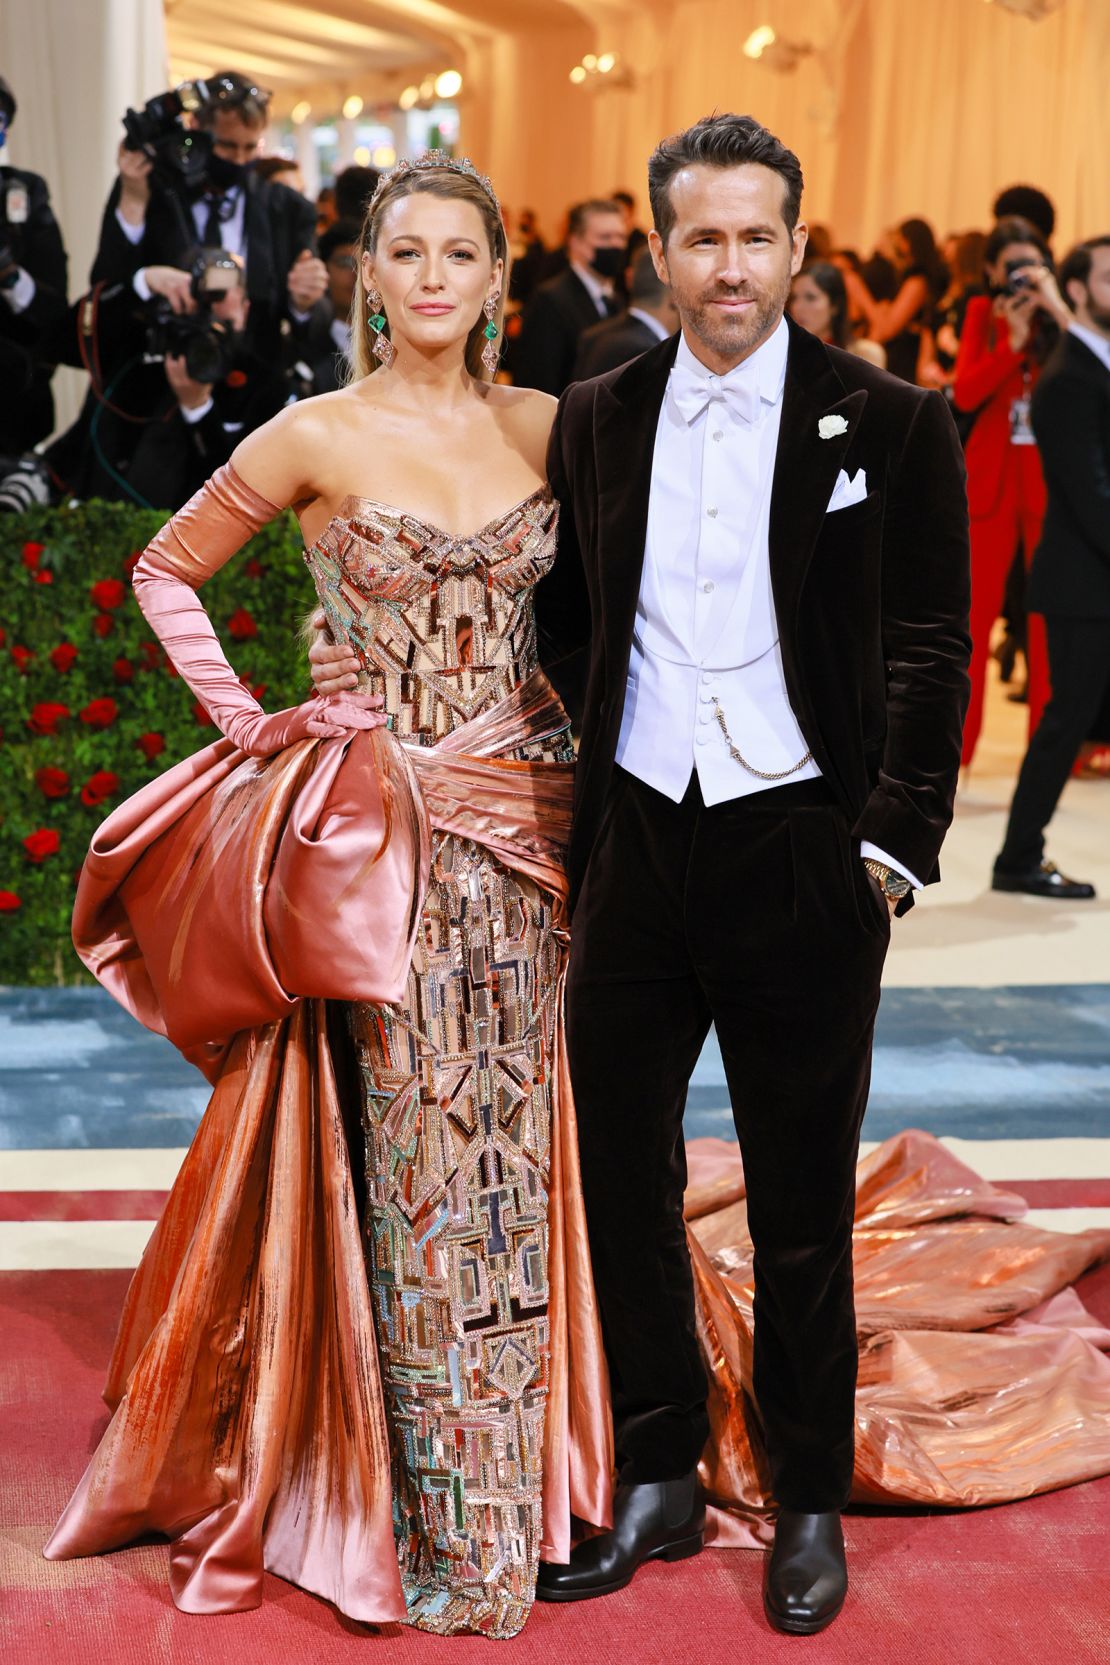 Actors Blake Lively and Ryan Reynolds embraced the theme, with Lively in a glittering Versace beaded gown with an oversized coppery satin bow and matching gloves, and Reynolds in a classic tuxedo.